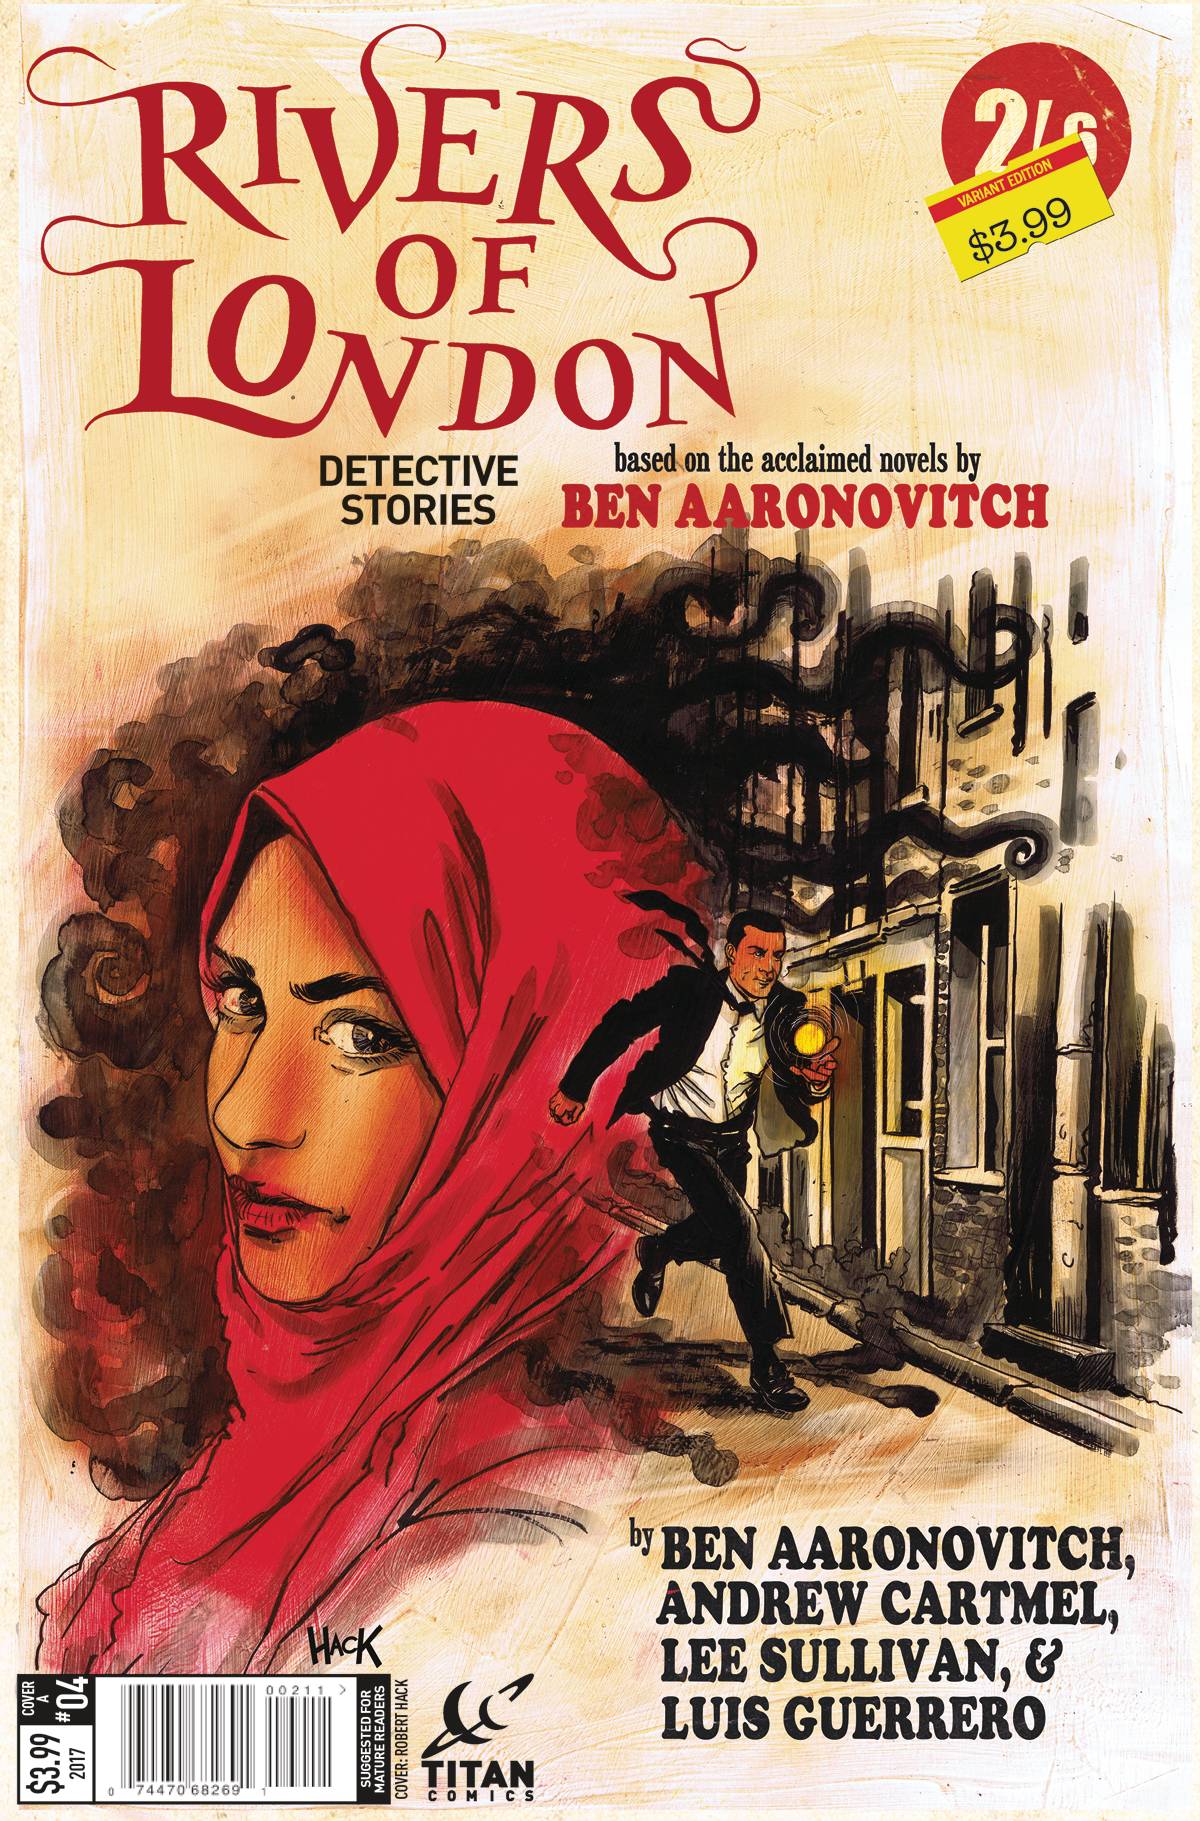 Rivers of London Detective Stories #4